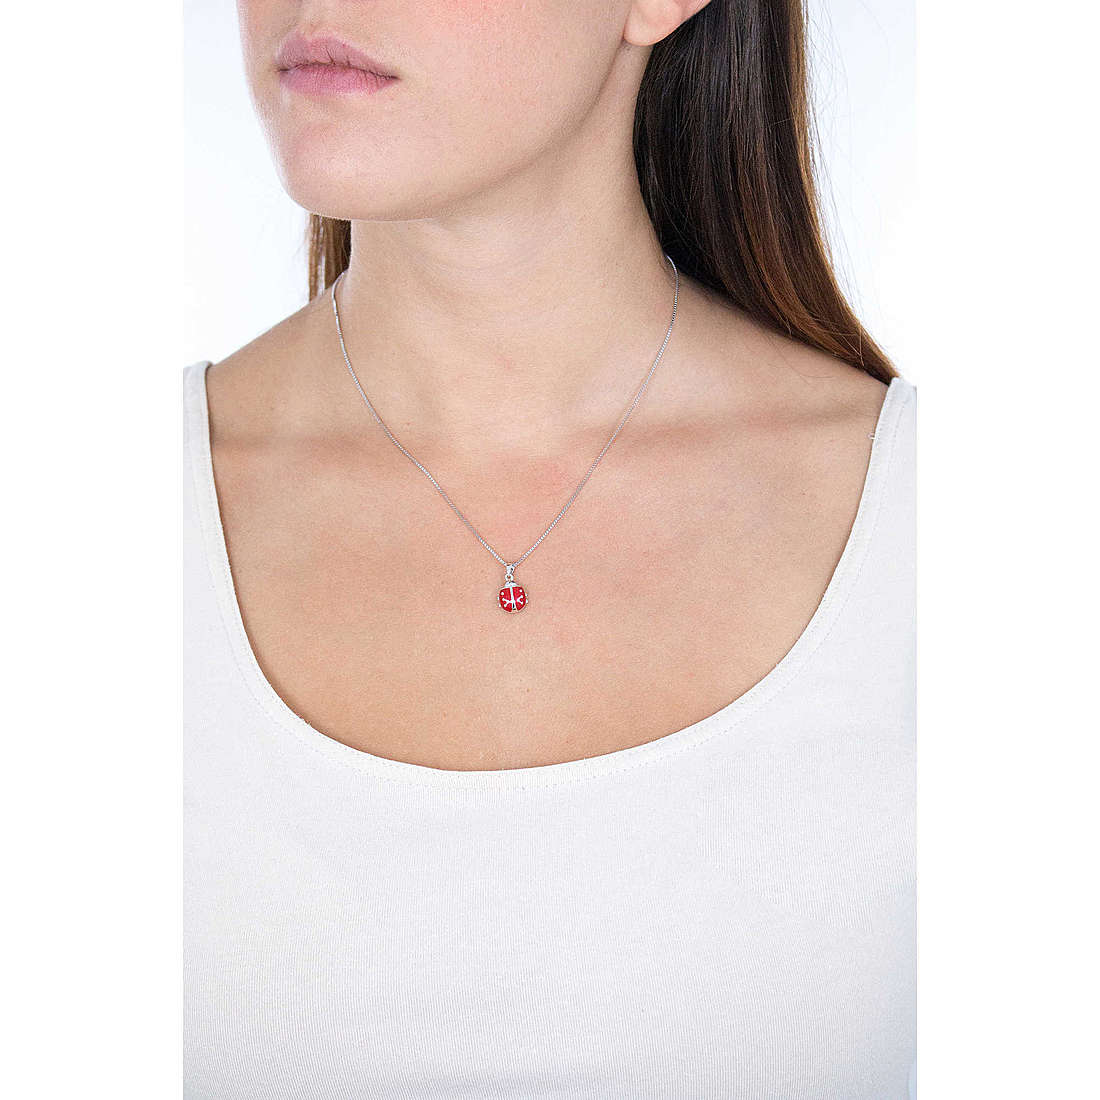 GioiaPura necklaces Coccinella woman WCT00348DL wearing